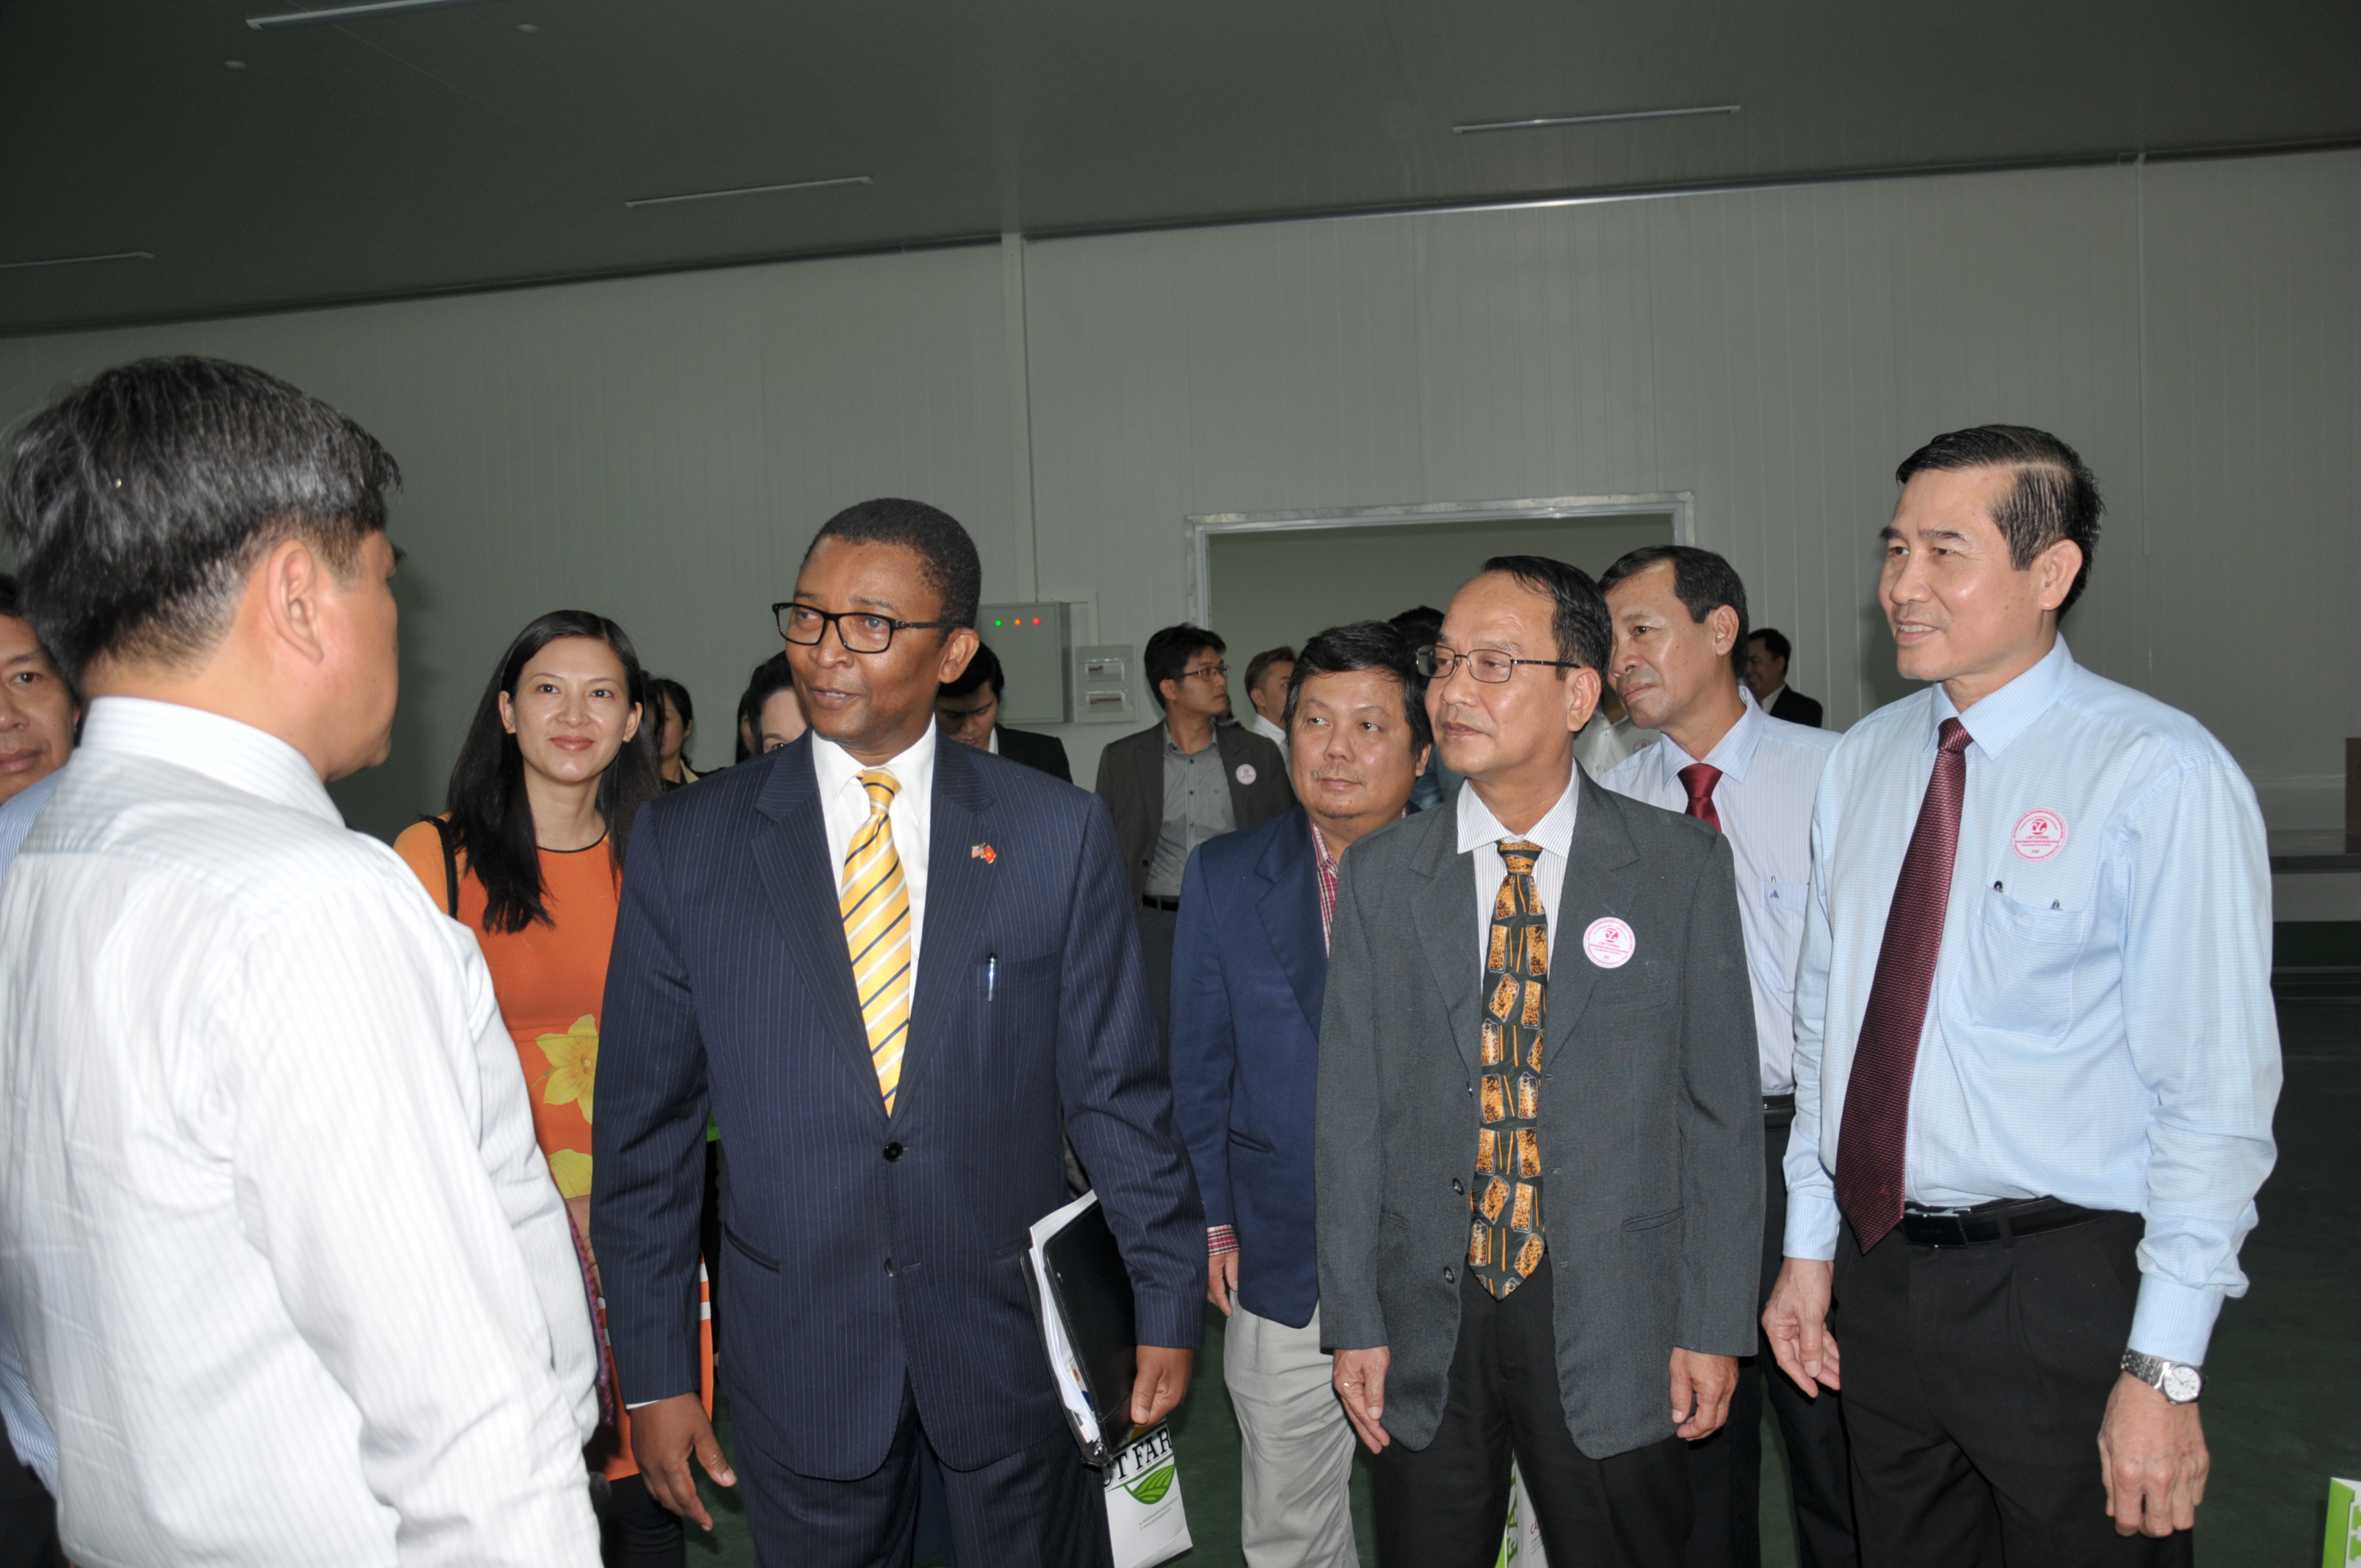 Gerald Smith (3rd R), senior agriculture attaché of the U.S. Consulate General in Ho Chi Minh City, speaks with officials from Vietnam’s Ministry of Agriculture and Rural Development during a ceremony to announce the first shipment of Vietnamese star apples into the U.S., Tien Giang Province, Vietnam December 26, 2017. Photo: Tuoi Tre